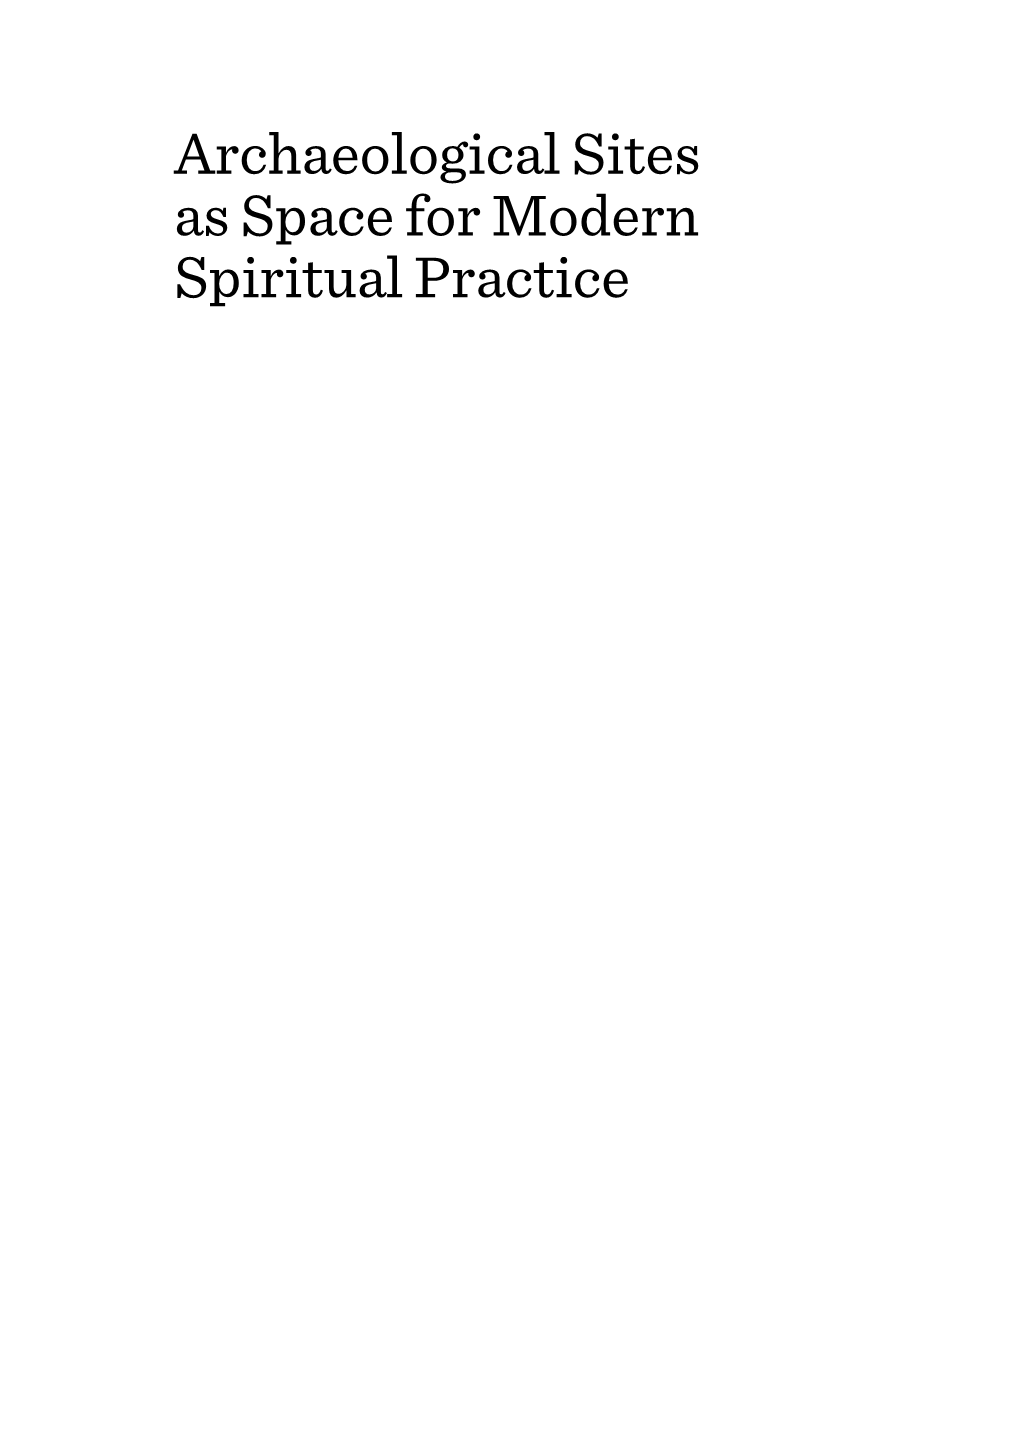 Archaeological Sites As Space for Modern Spiritual Practice